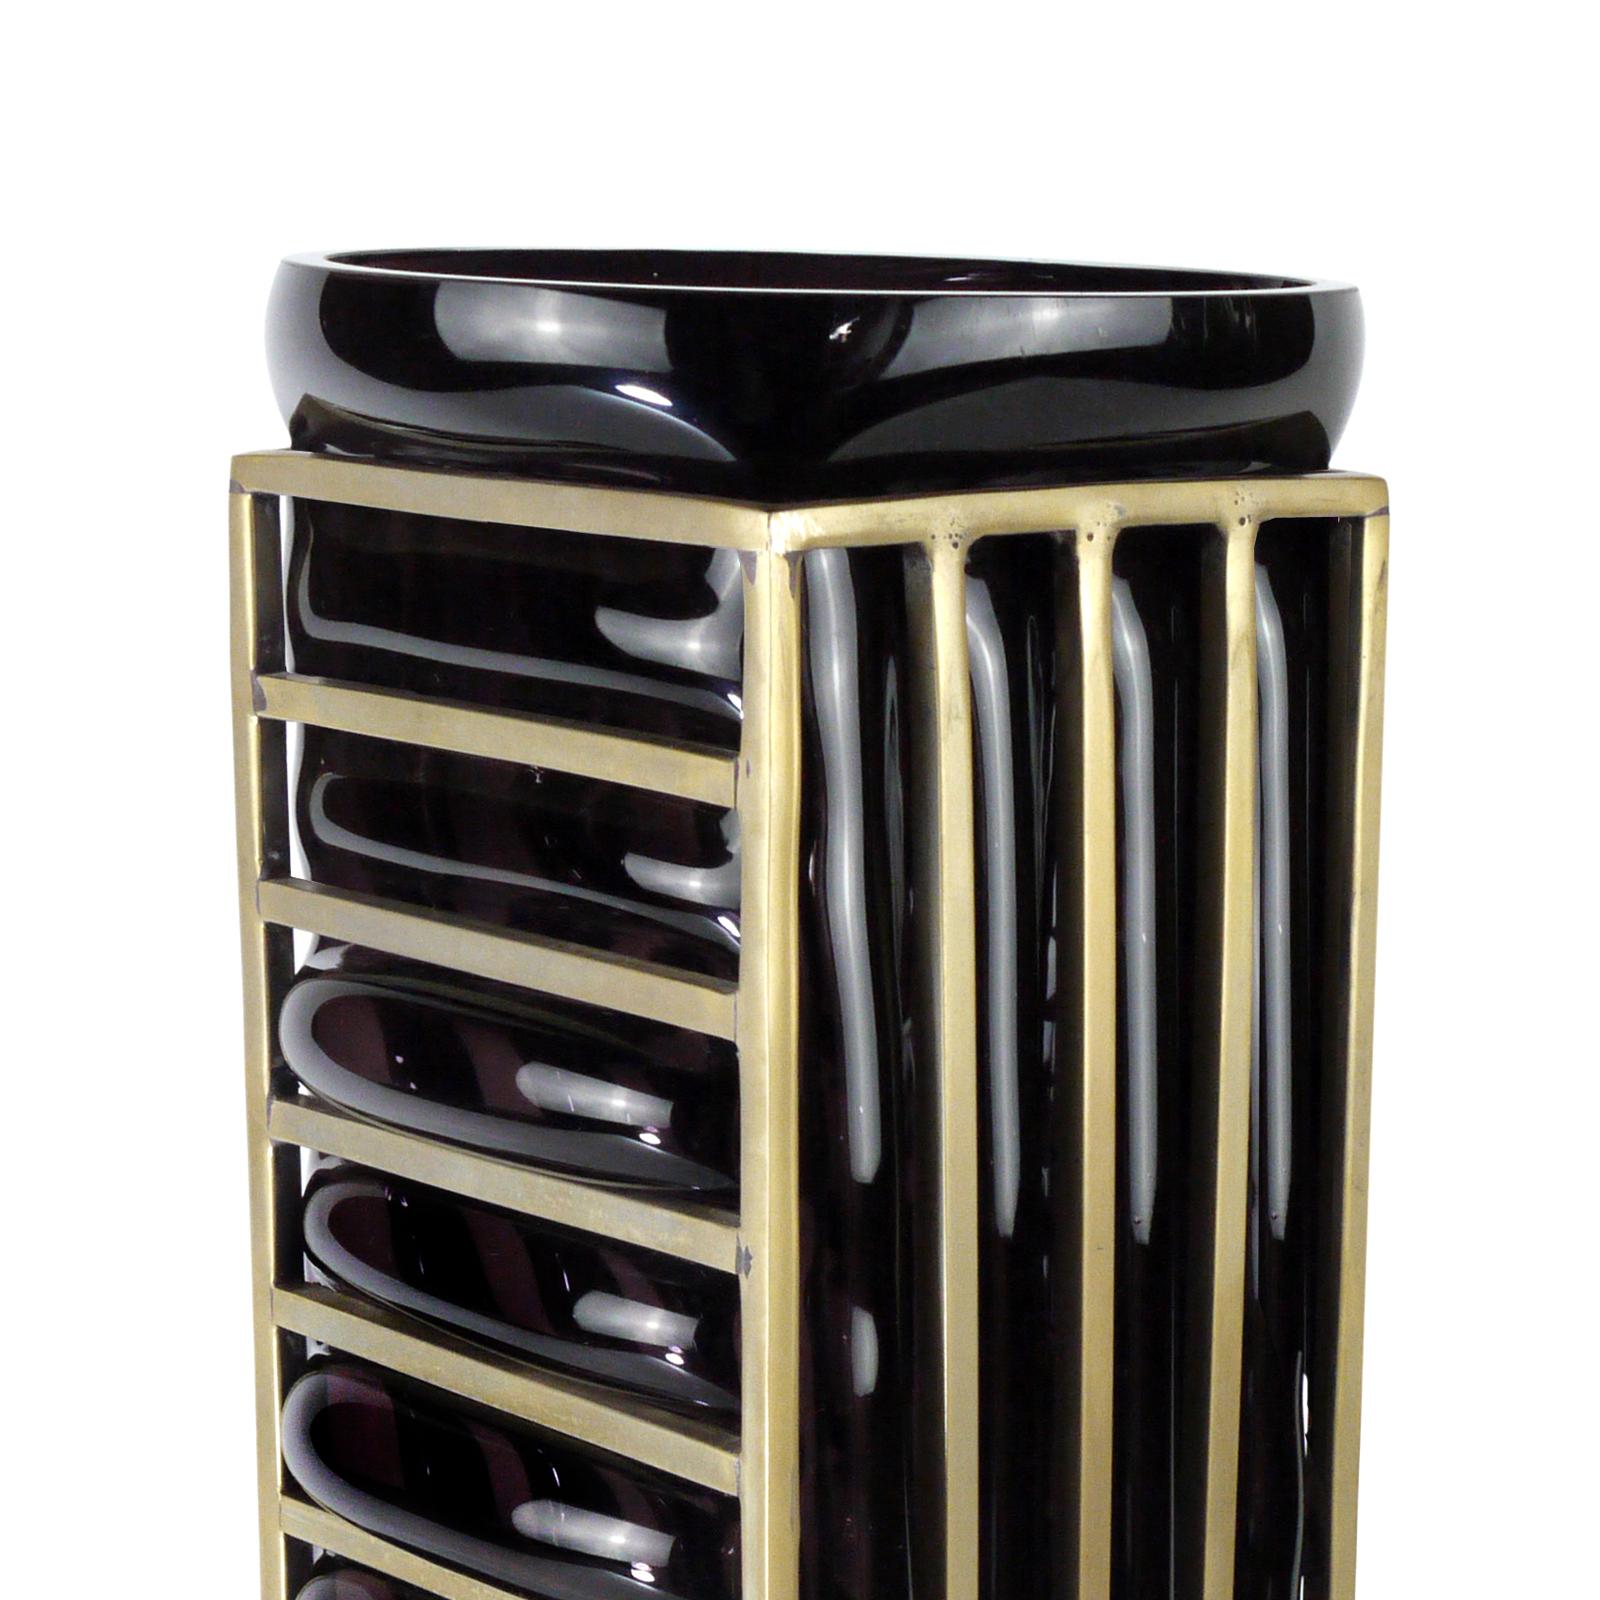 Vase enlace black glass rectangular
with handblown black glass and with
Brass structure around.